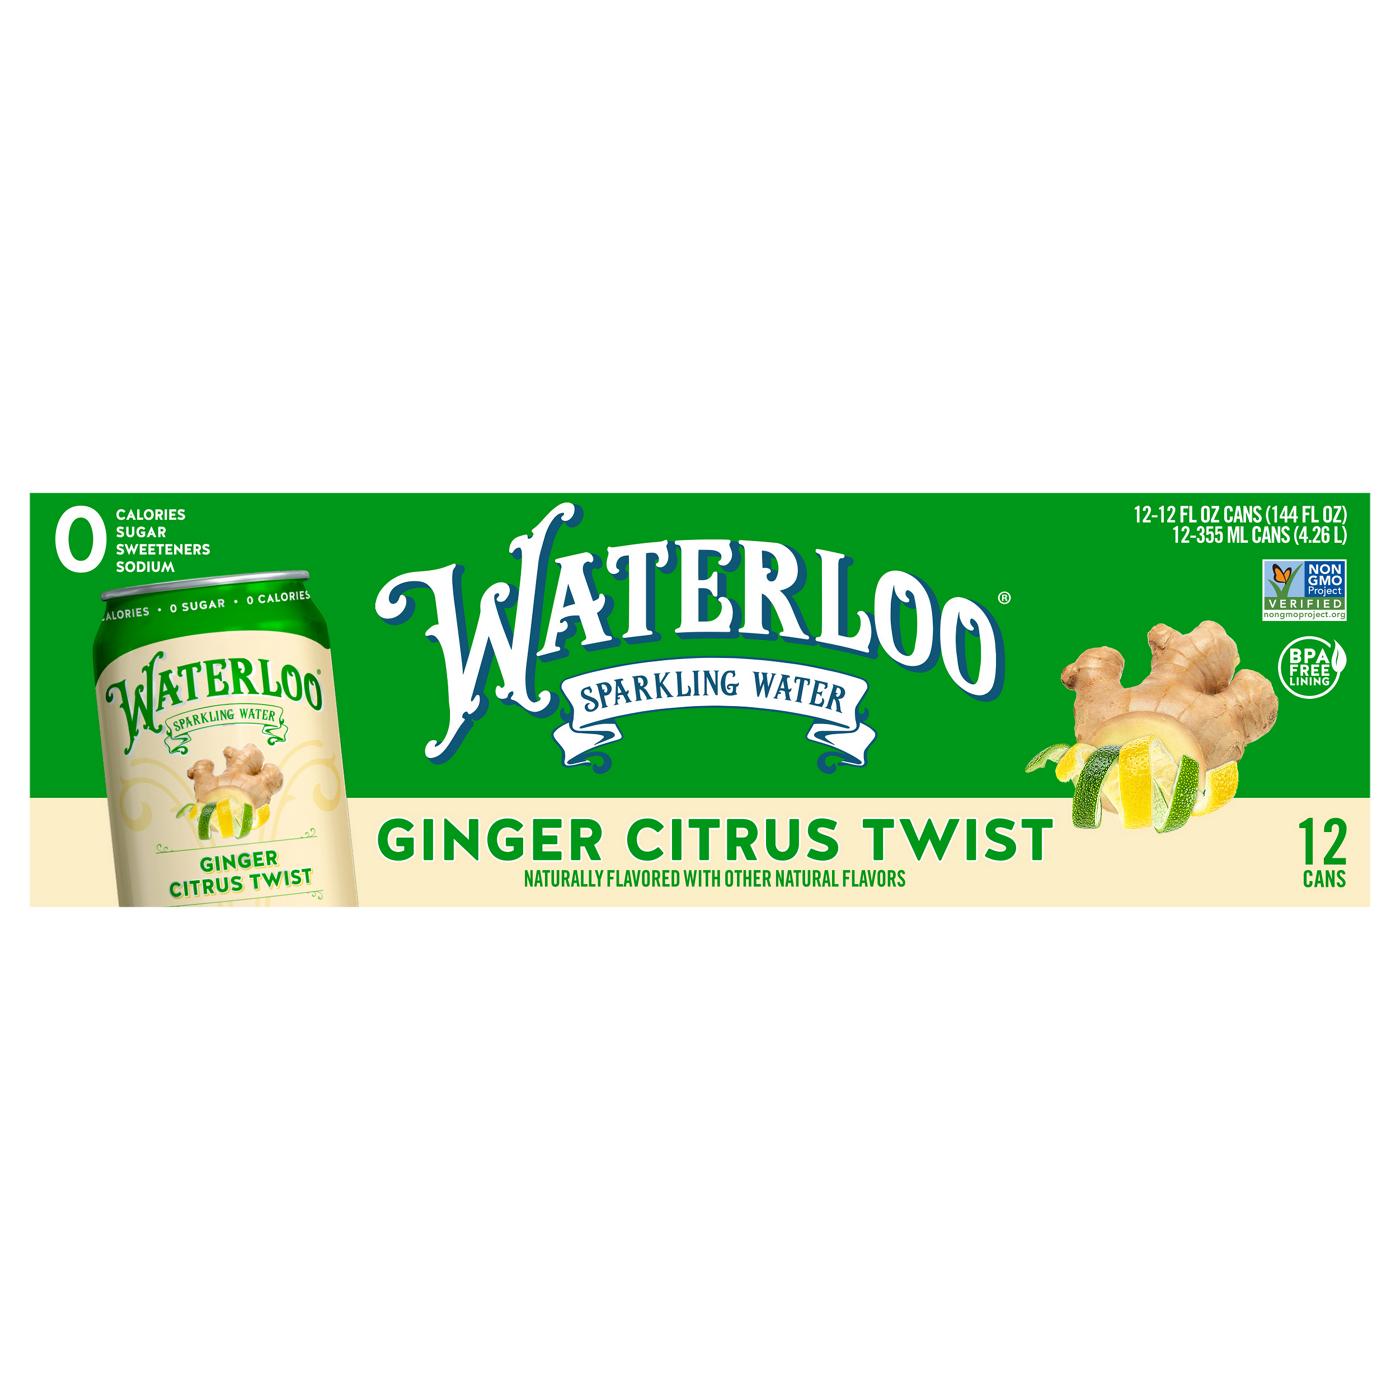 Waterloo Ginger Citrus Twist Sparkling Water 12 pk Cans; image 1 of 2